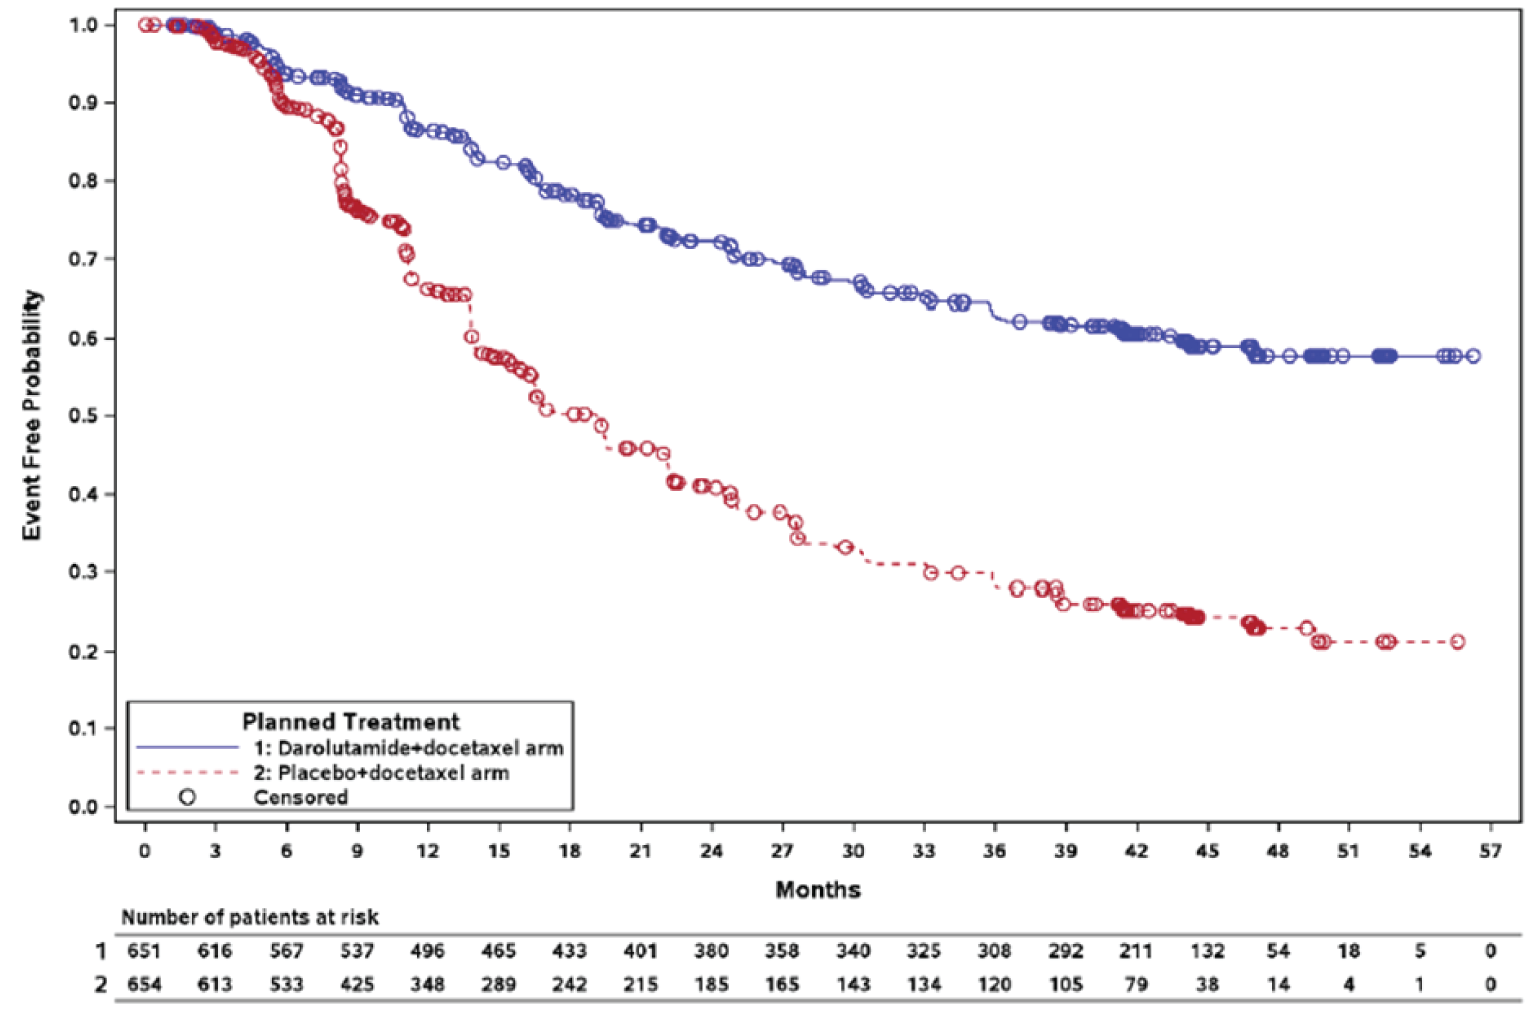 Kaplan-Meier curve of time to castration-resistant prostate cancer for the darolutamide plus docetaxel and ADT arm and the placebo plus docetaxel and ADT arm from 0 to 57 months of follow-up. The curves diverge at 6 months, with the darolutamide plus docetaxel and ADT arm having a higher event-free probability than the placebo plus docetaxel and ADT arm. The curves remain separated until longest follow-up at 57 months.